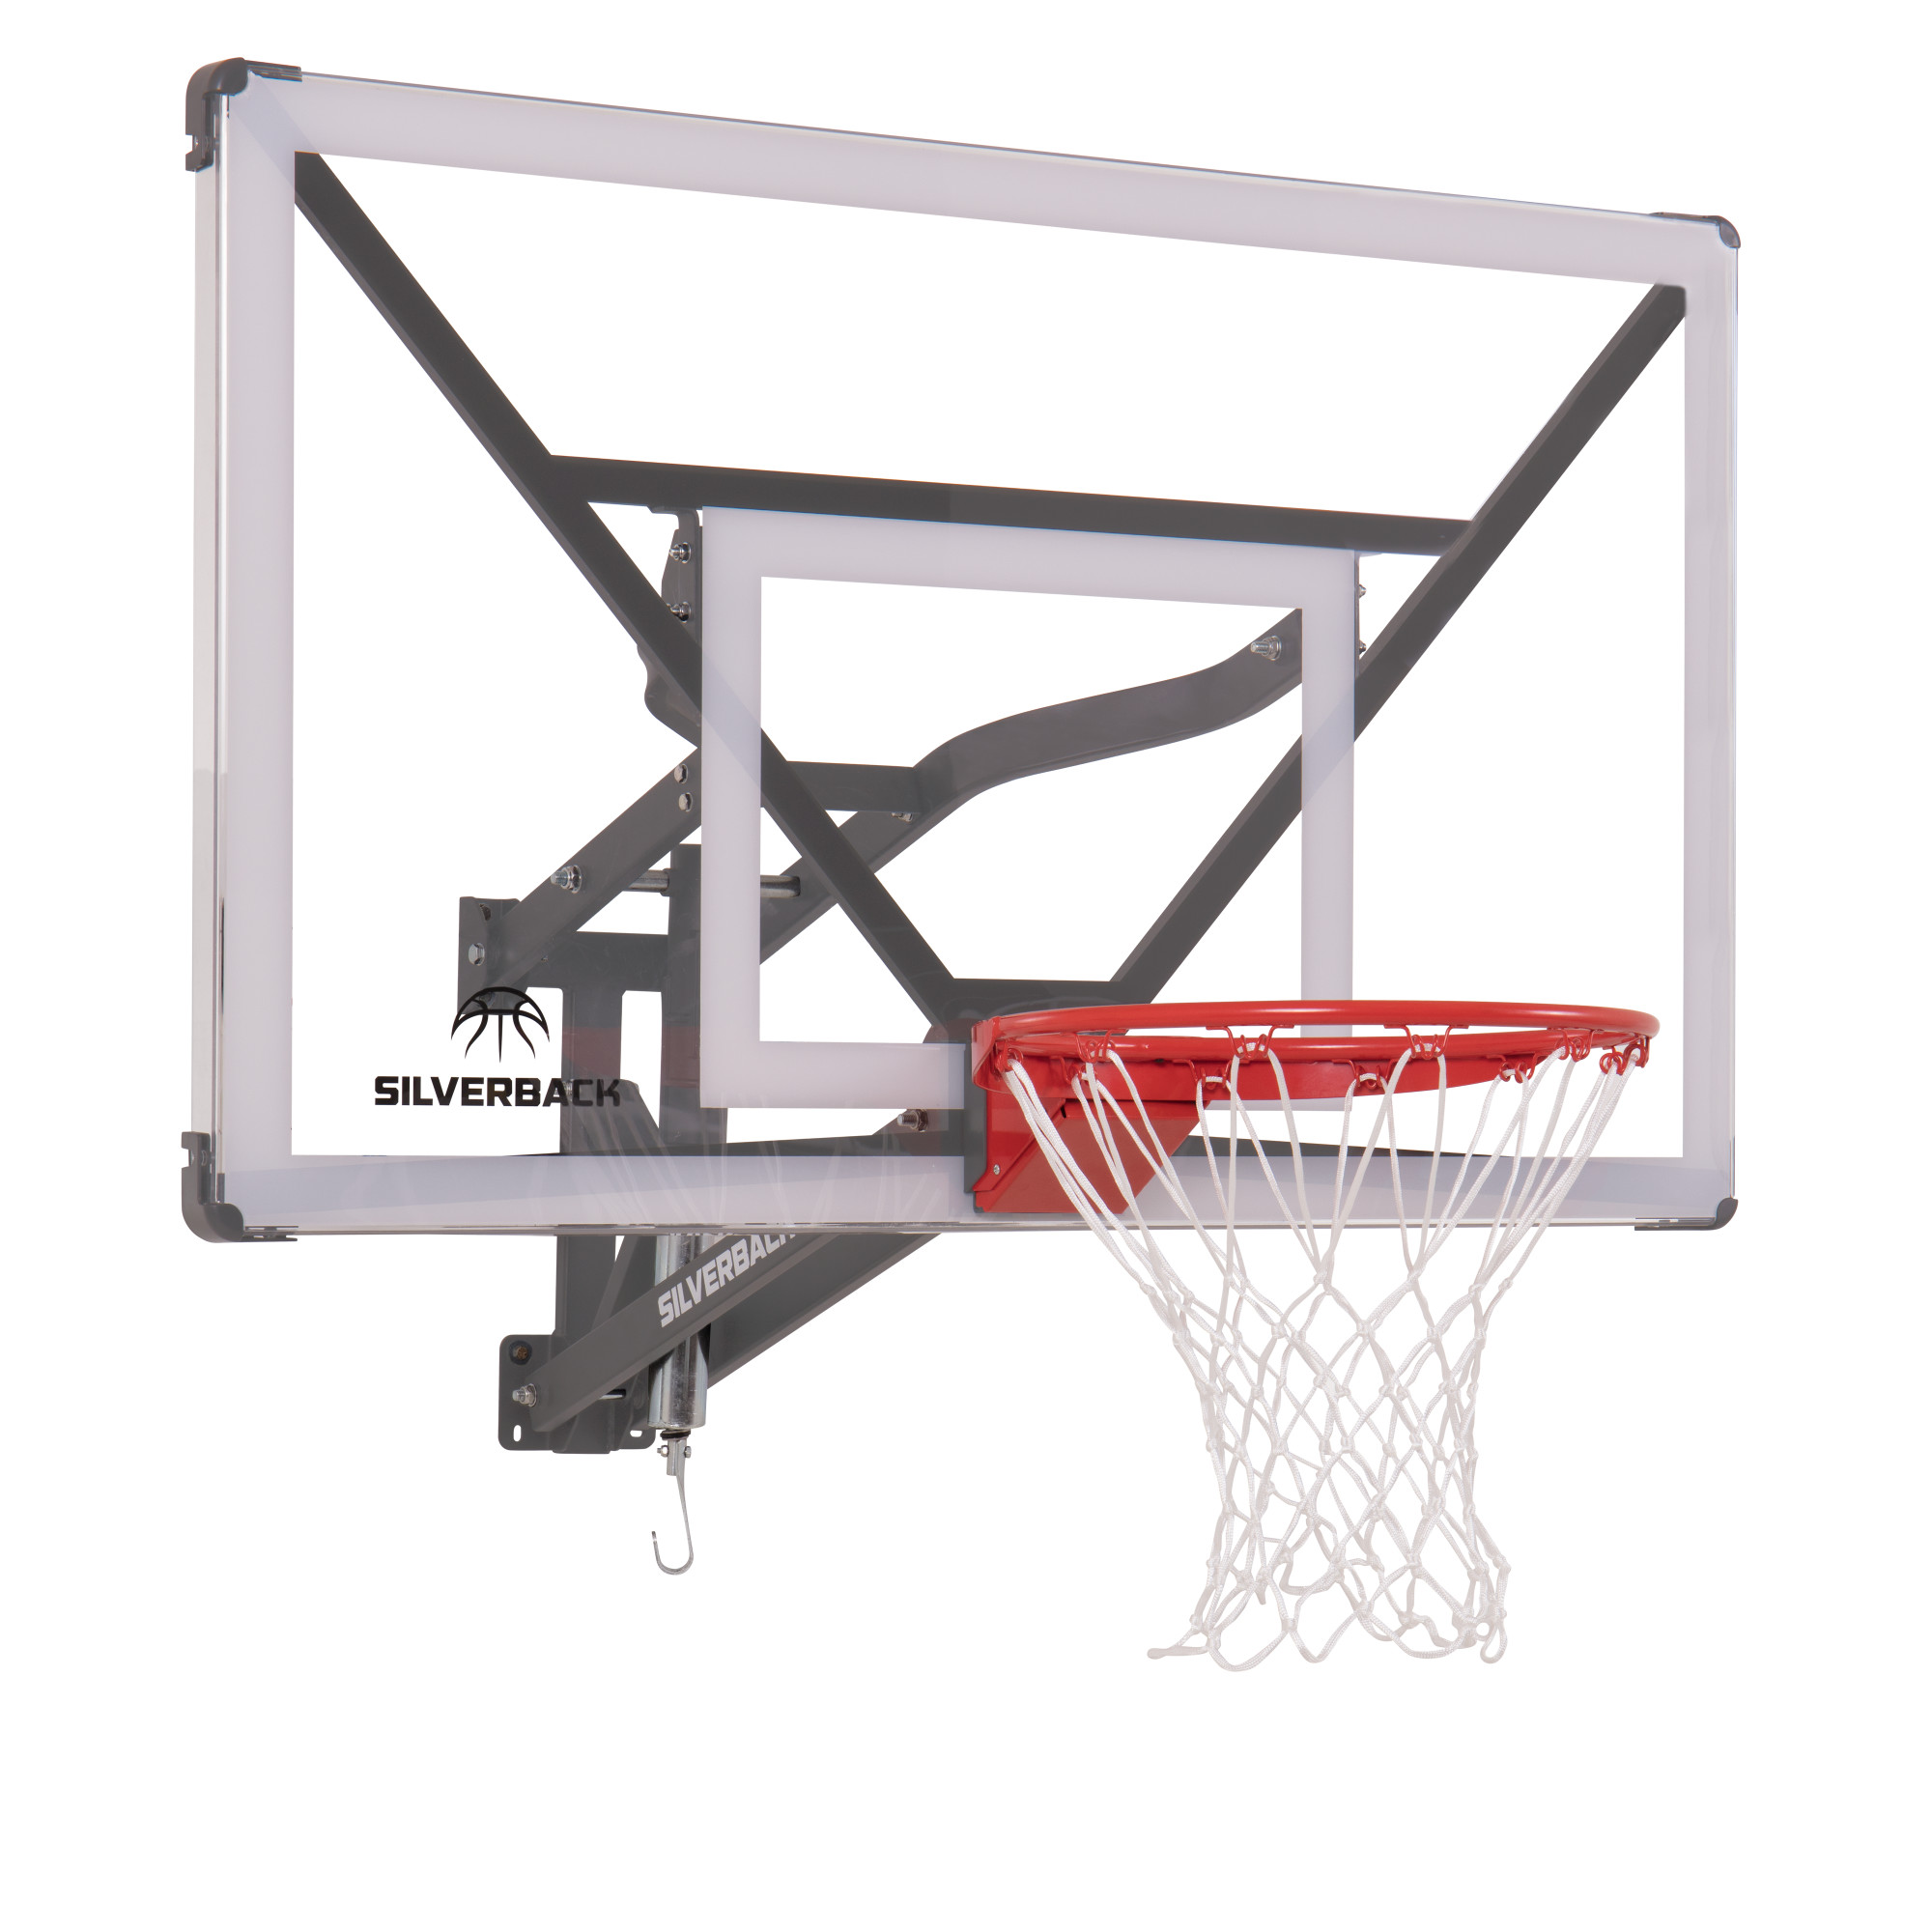 Silverback SBX 54" Wall Mounted Adjustable-Height Basketball Hoop with Quick Play Design - image 1 of 11